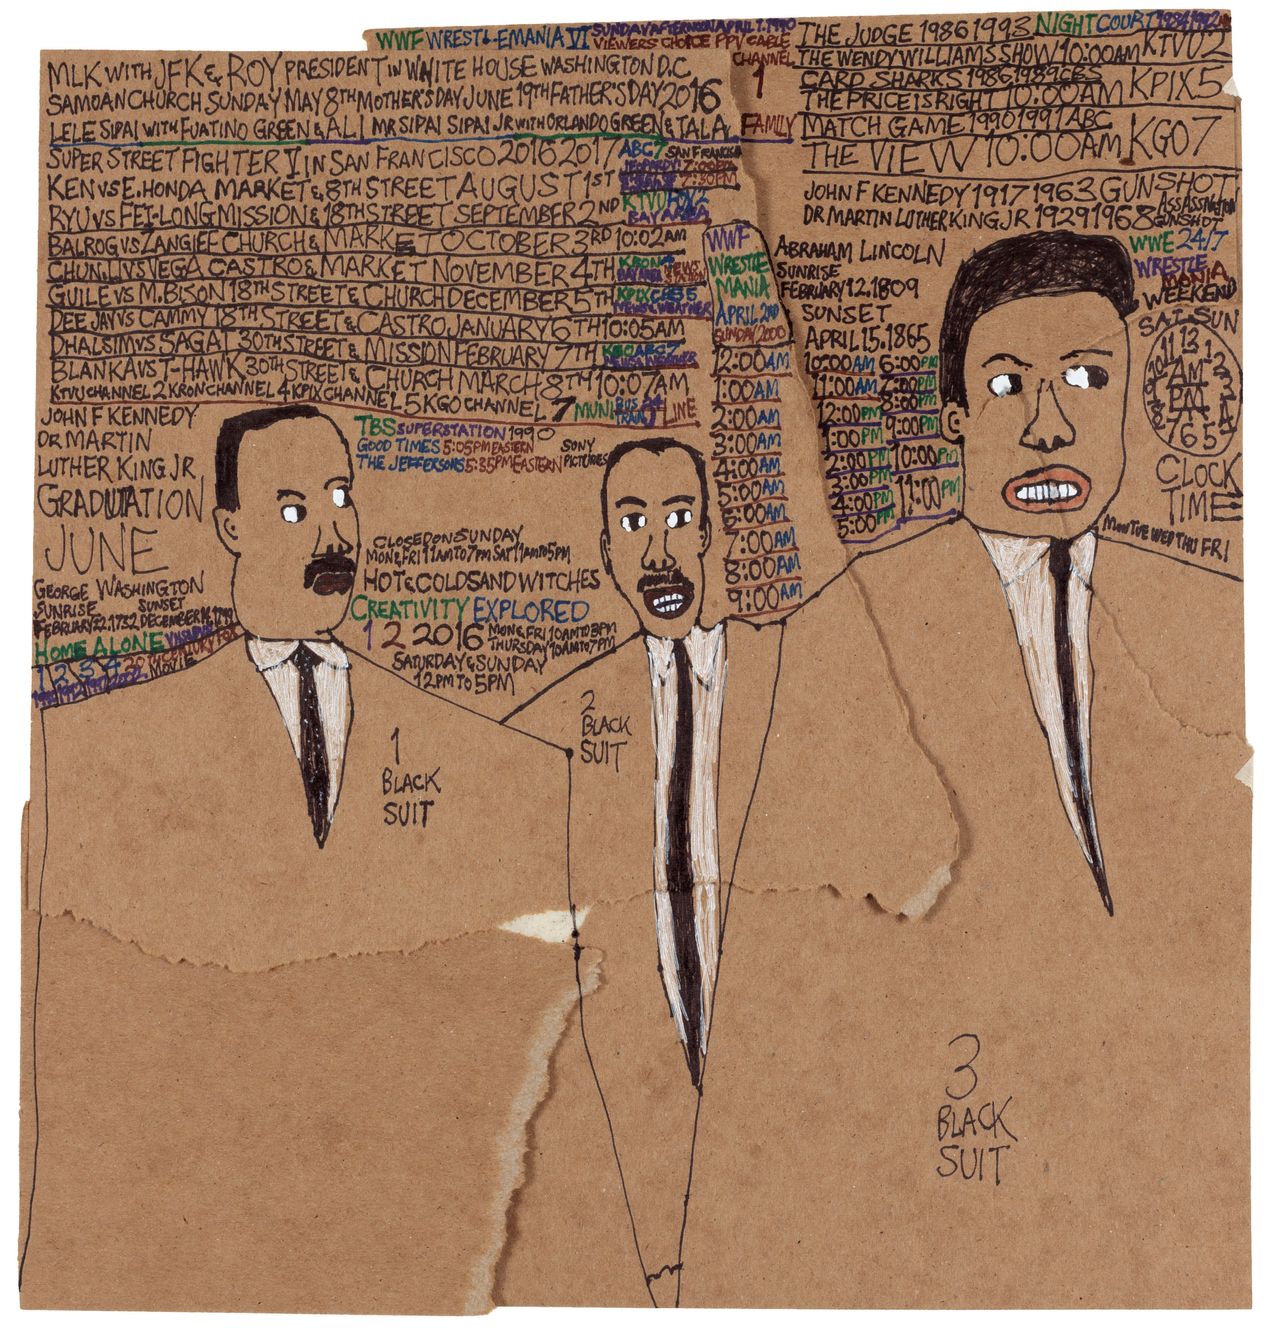 Daniel Green, "MLK with JFK and Roy," 2016, marker on paper, 14.25 x 13.5 inches